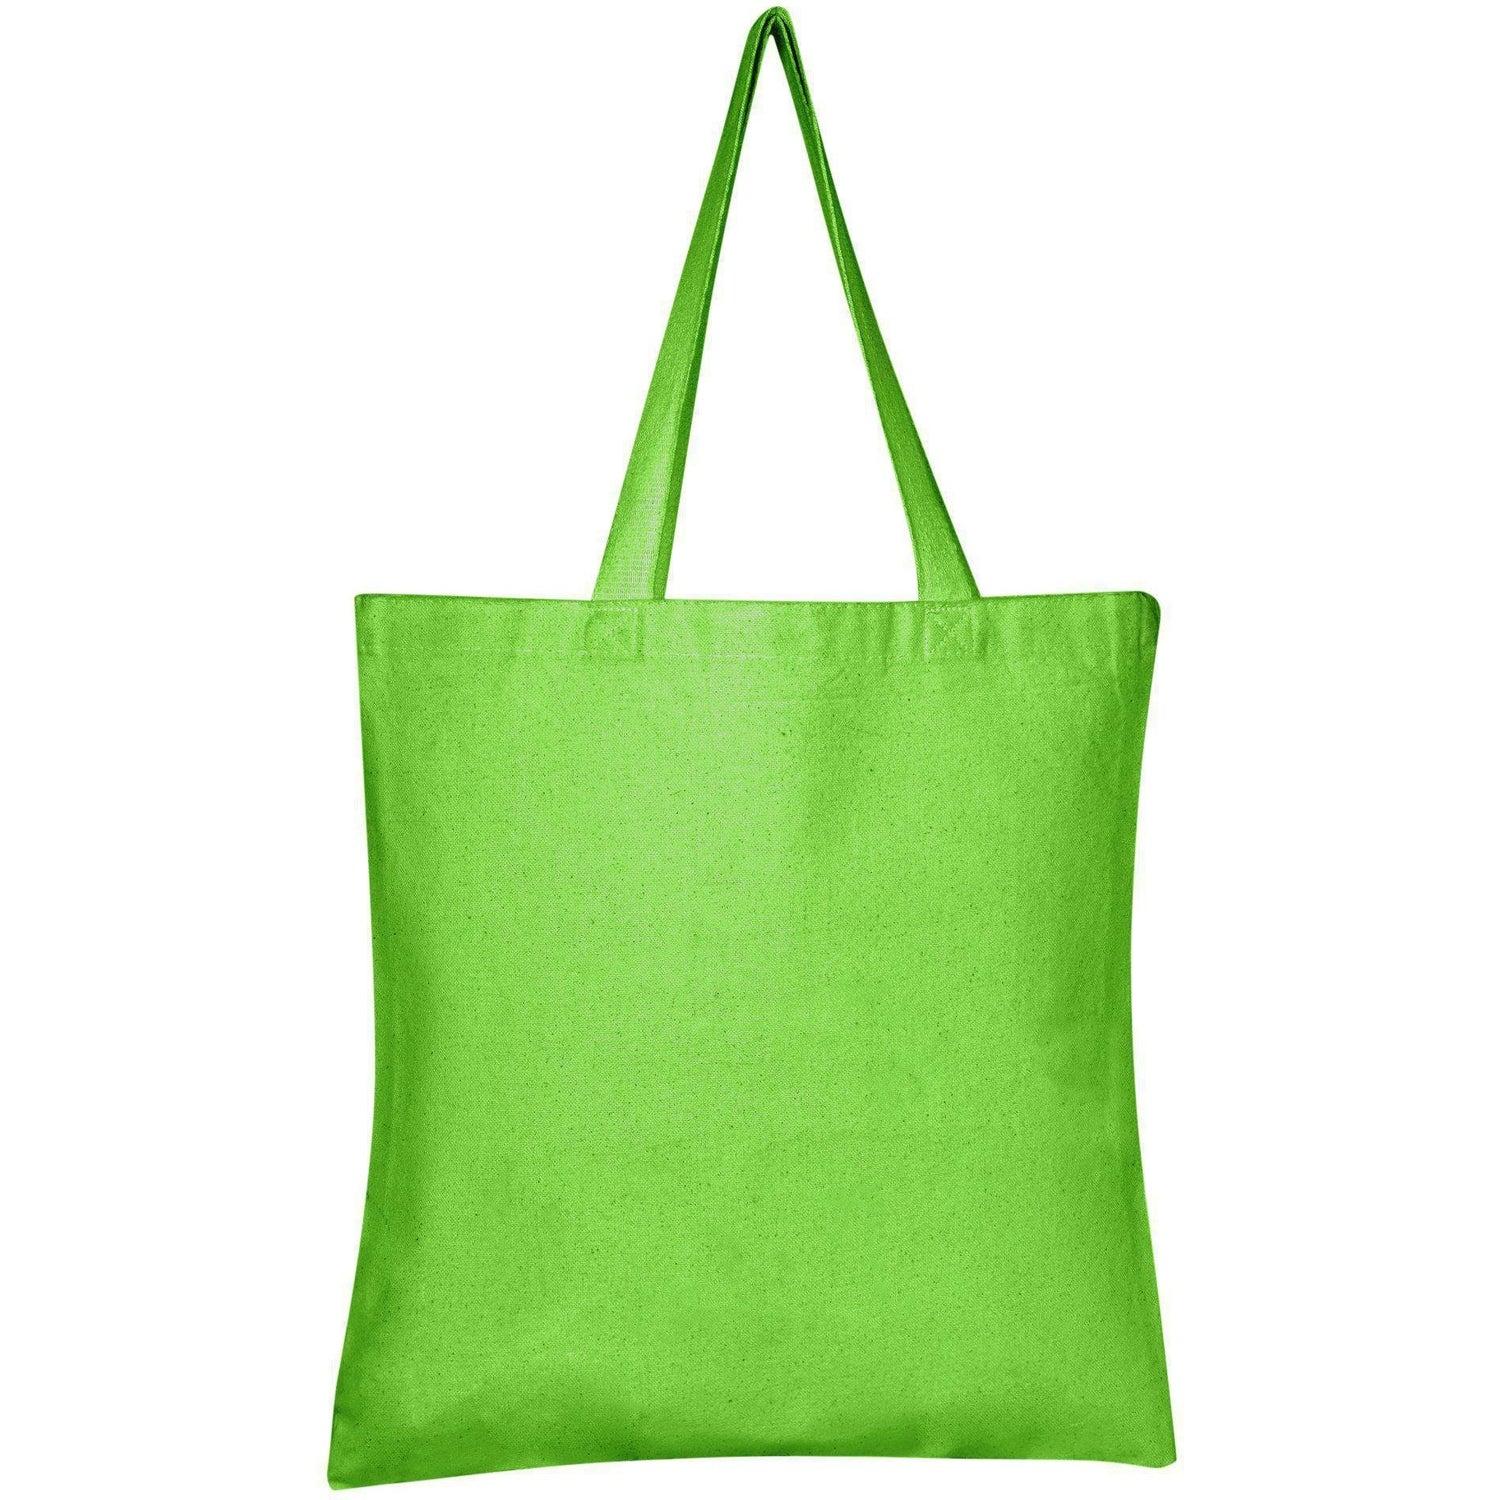 Wholesale Canvas Tote Bags - Standard Promotional Tote Bags in Bulk